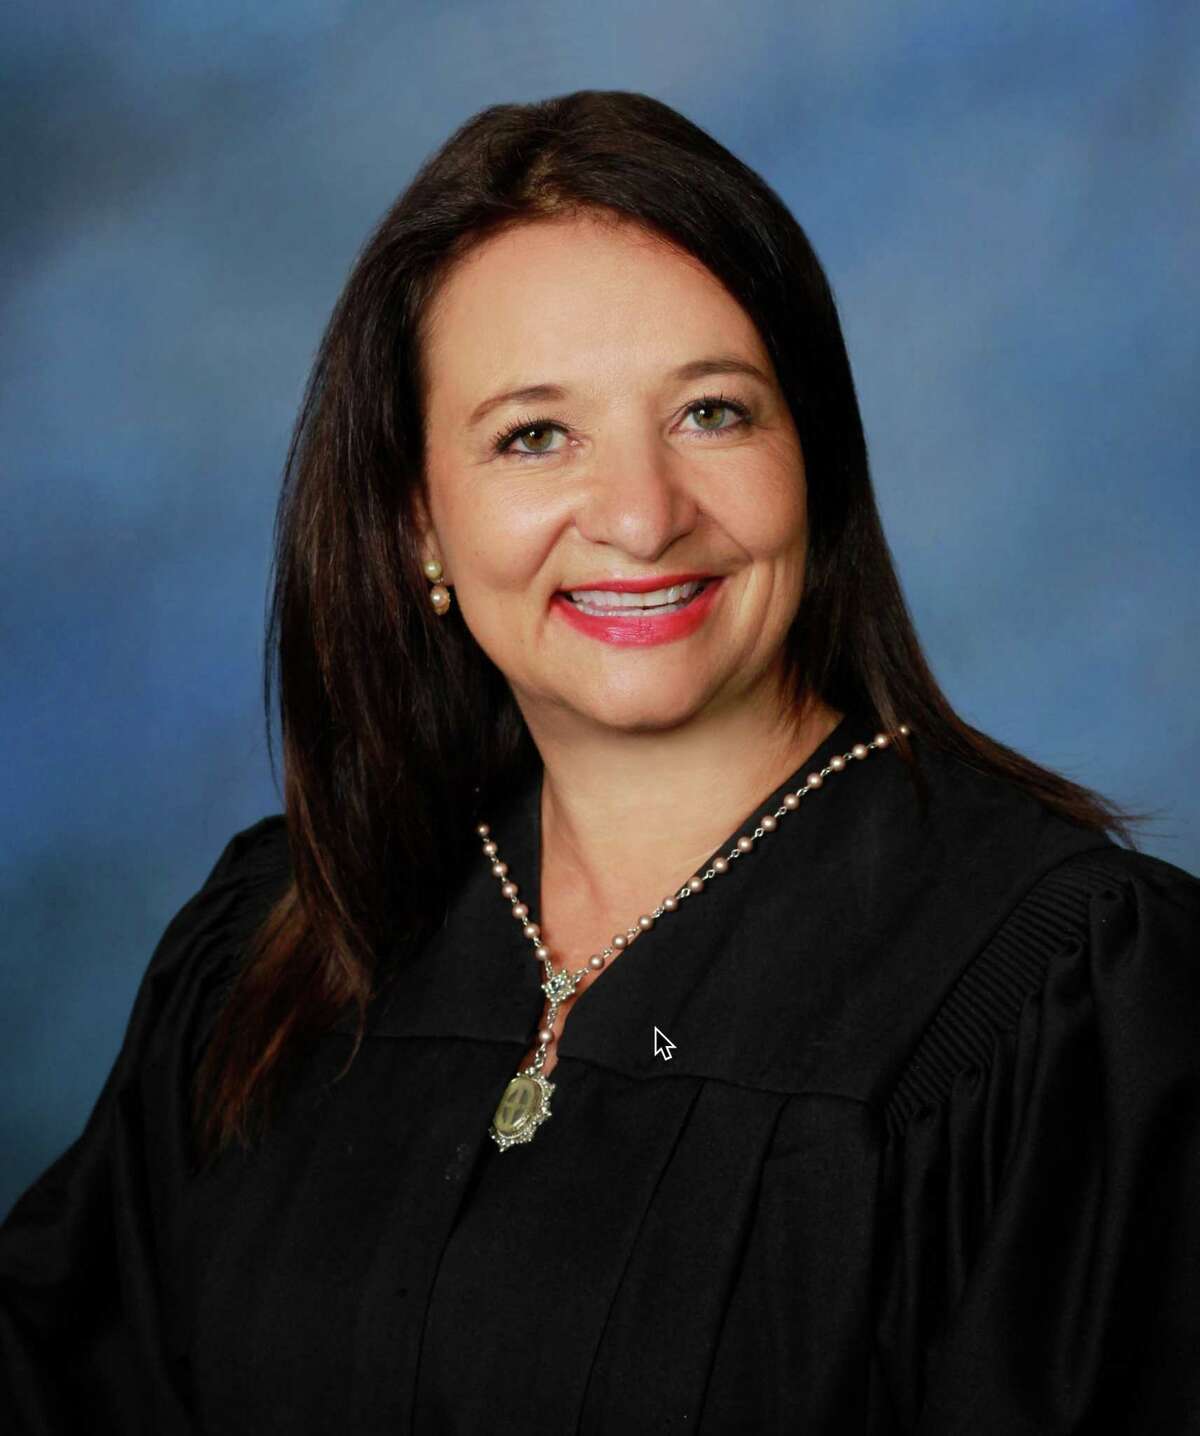 Susan Skinner, Judge of County Court at Law #14